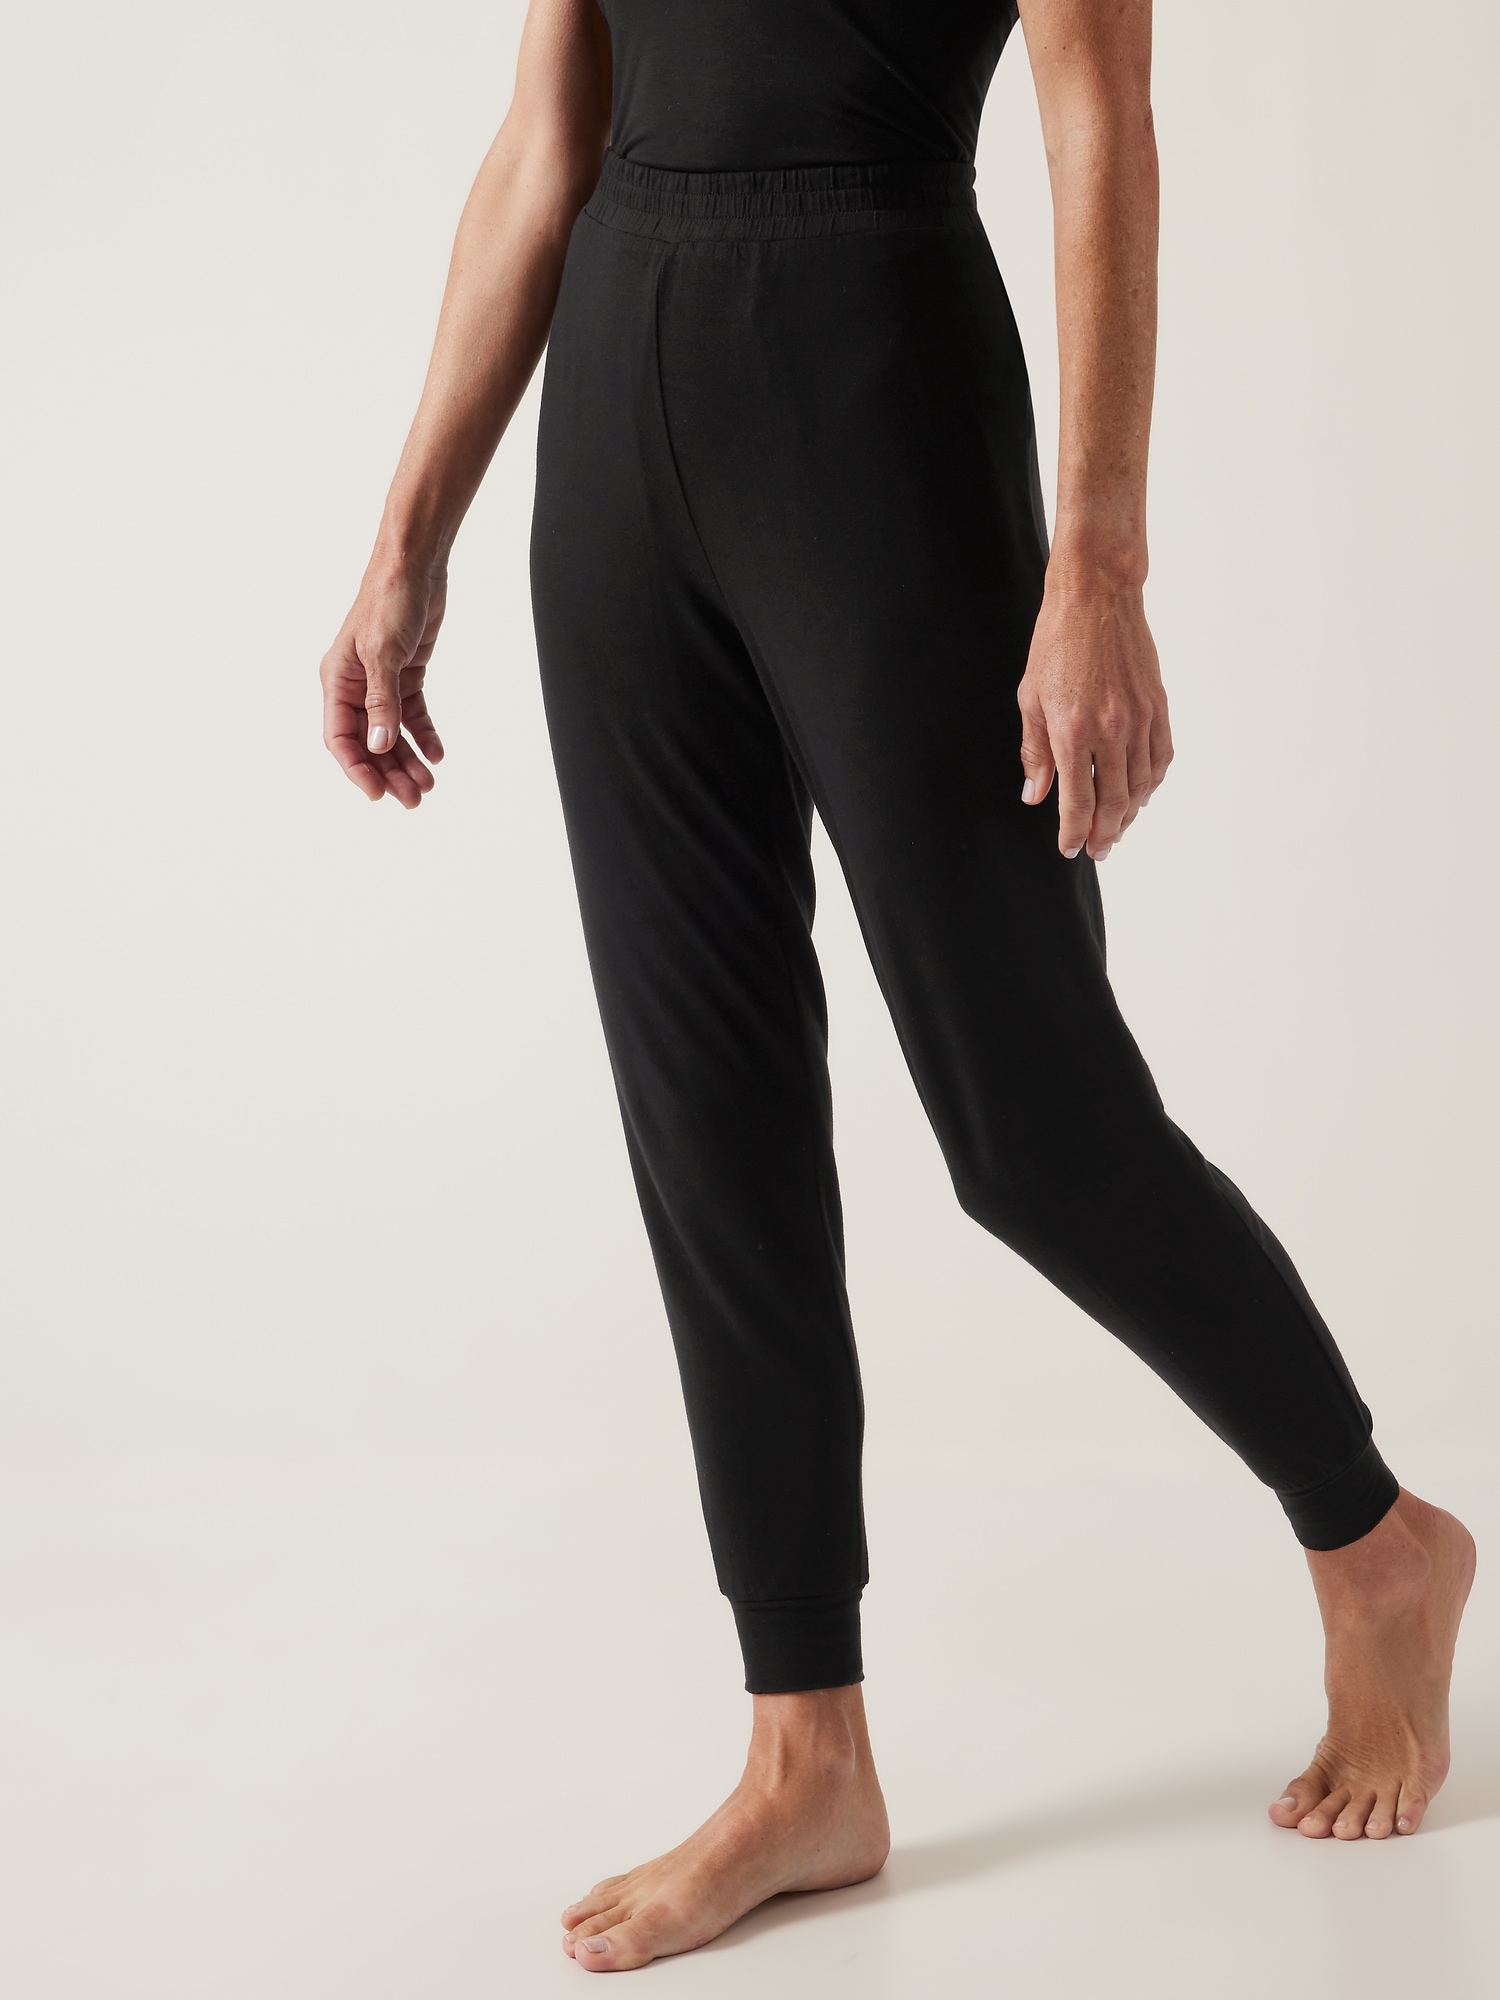 Athleta Nighttime Bliss Sleep Cami, This Brand Just Launched a New  Sleepwear Line That's Crazy-Soft